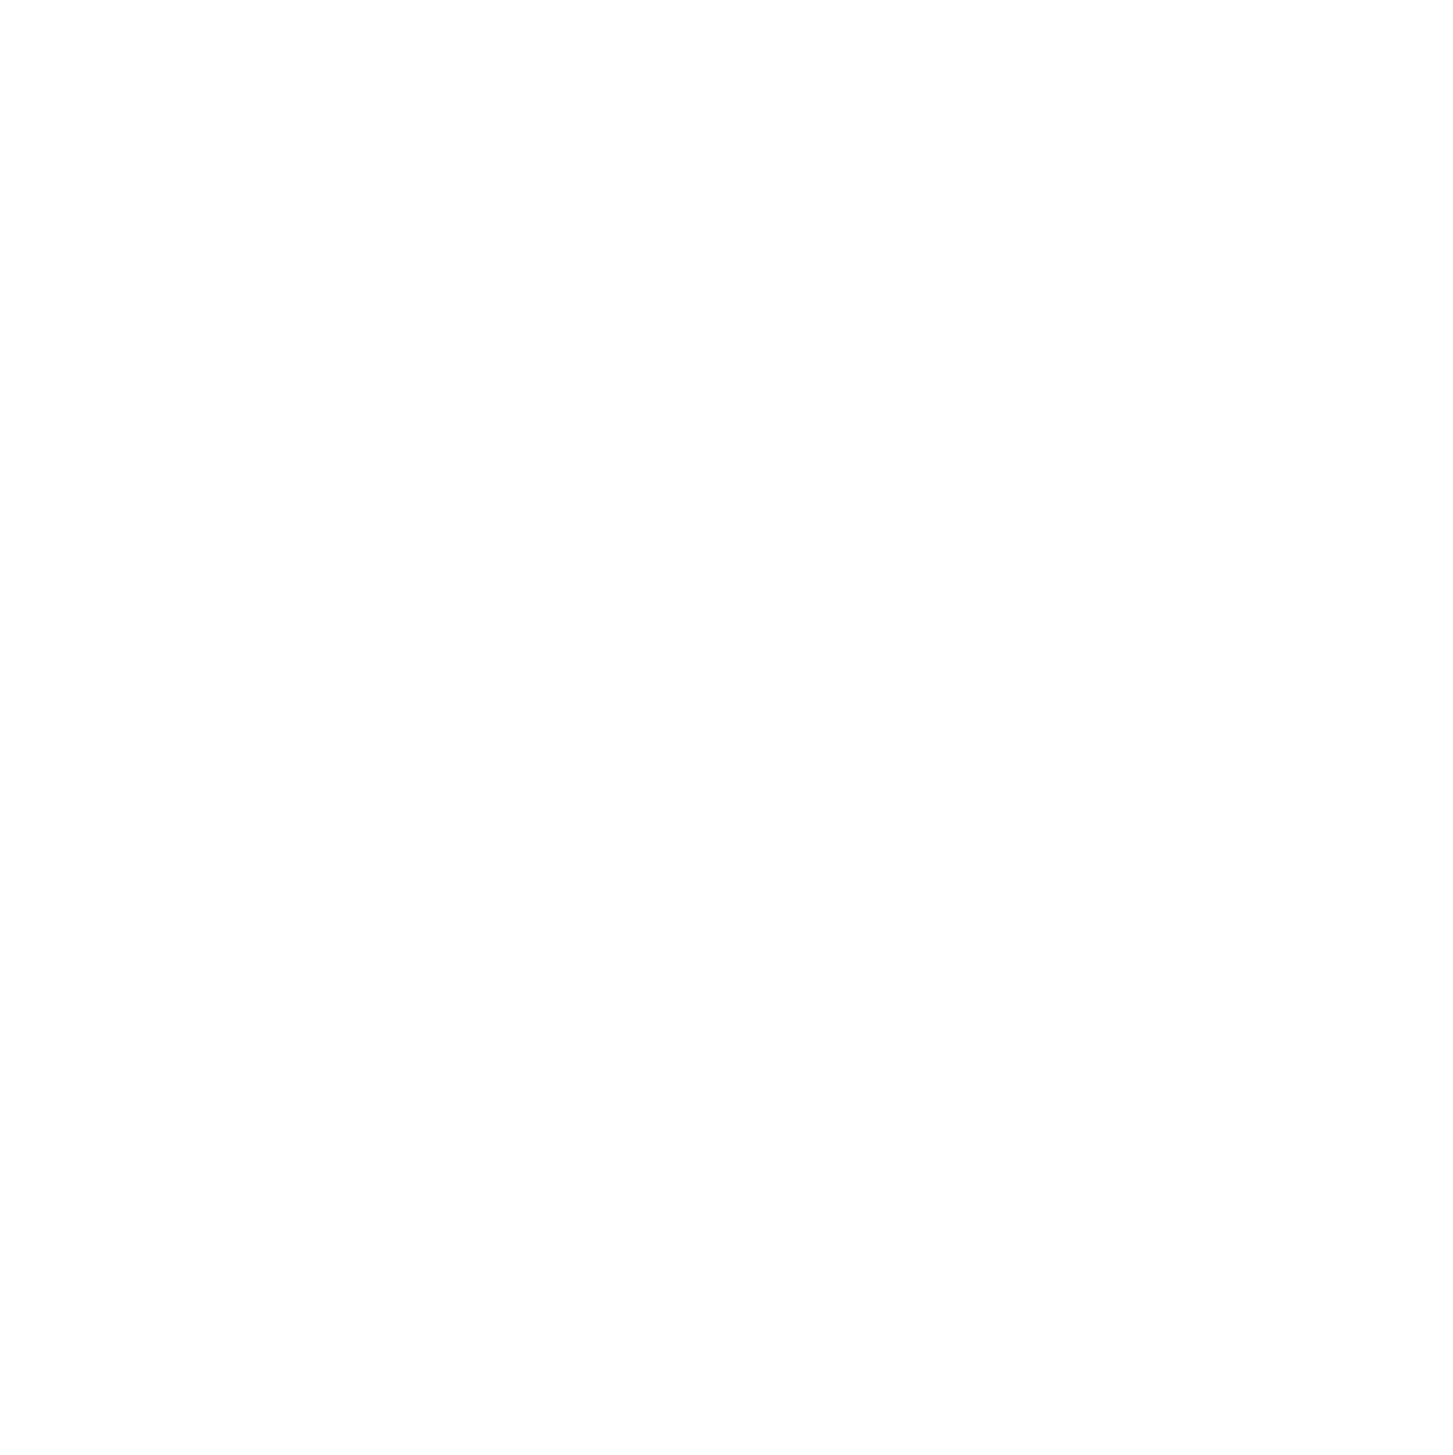 Donate Now To Help Us Spread The Word - Kemp's Ridley Sea Turtle (1453x1455)